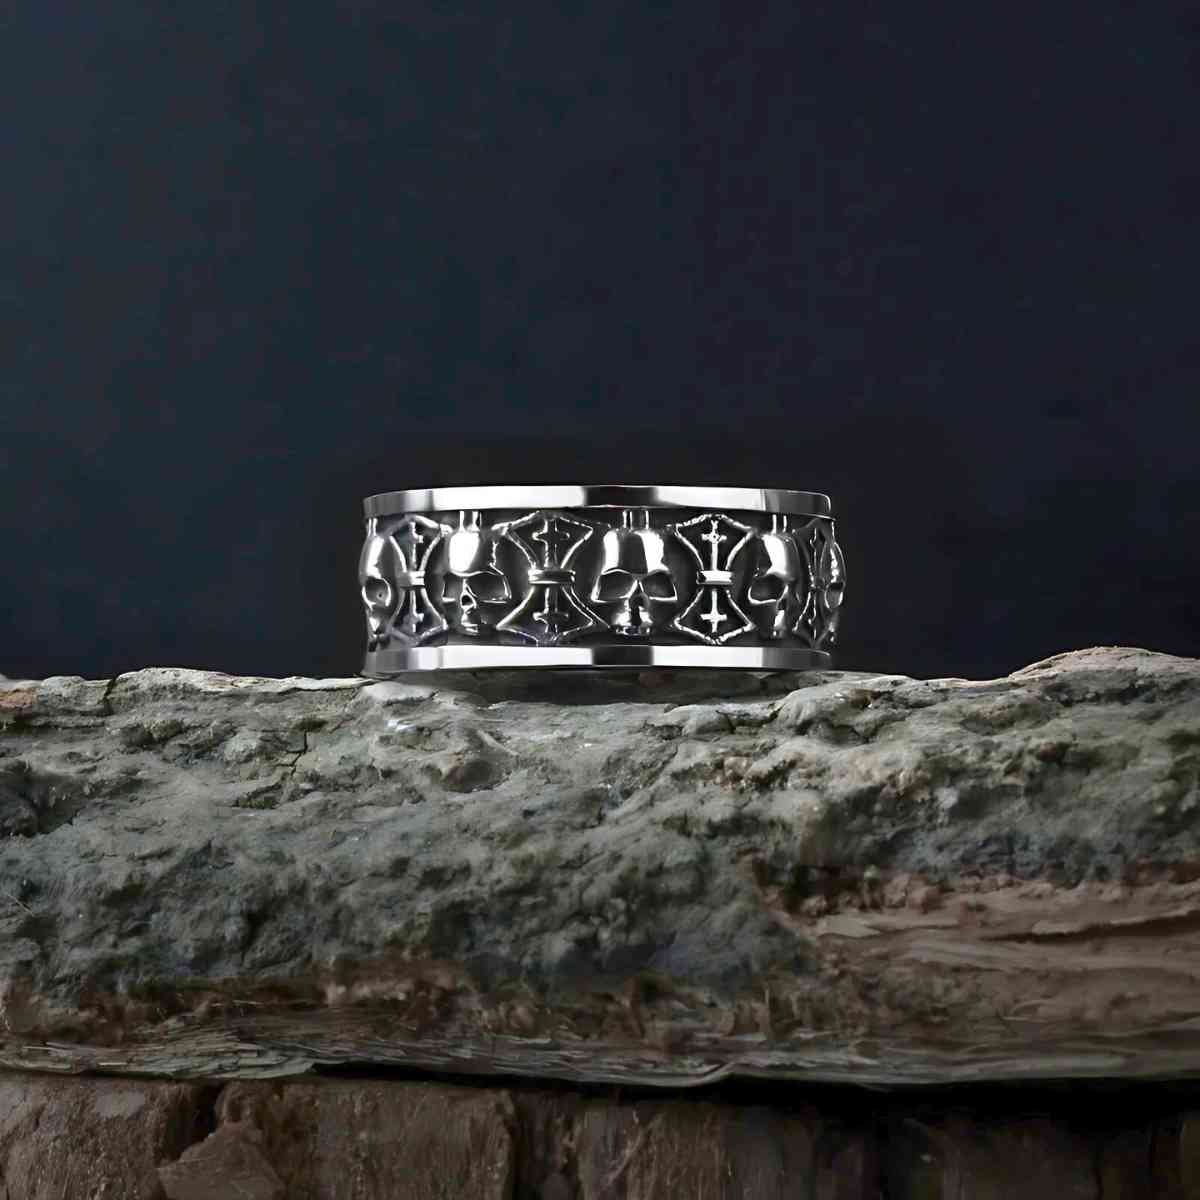 Skull and Crossbones Band Ring Xenos Jewelry